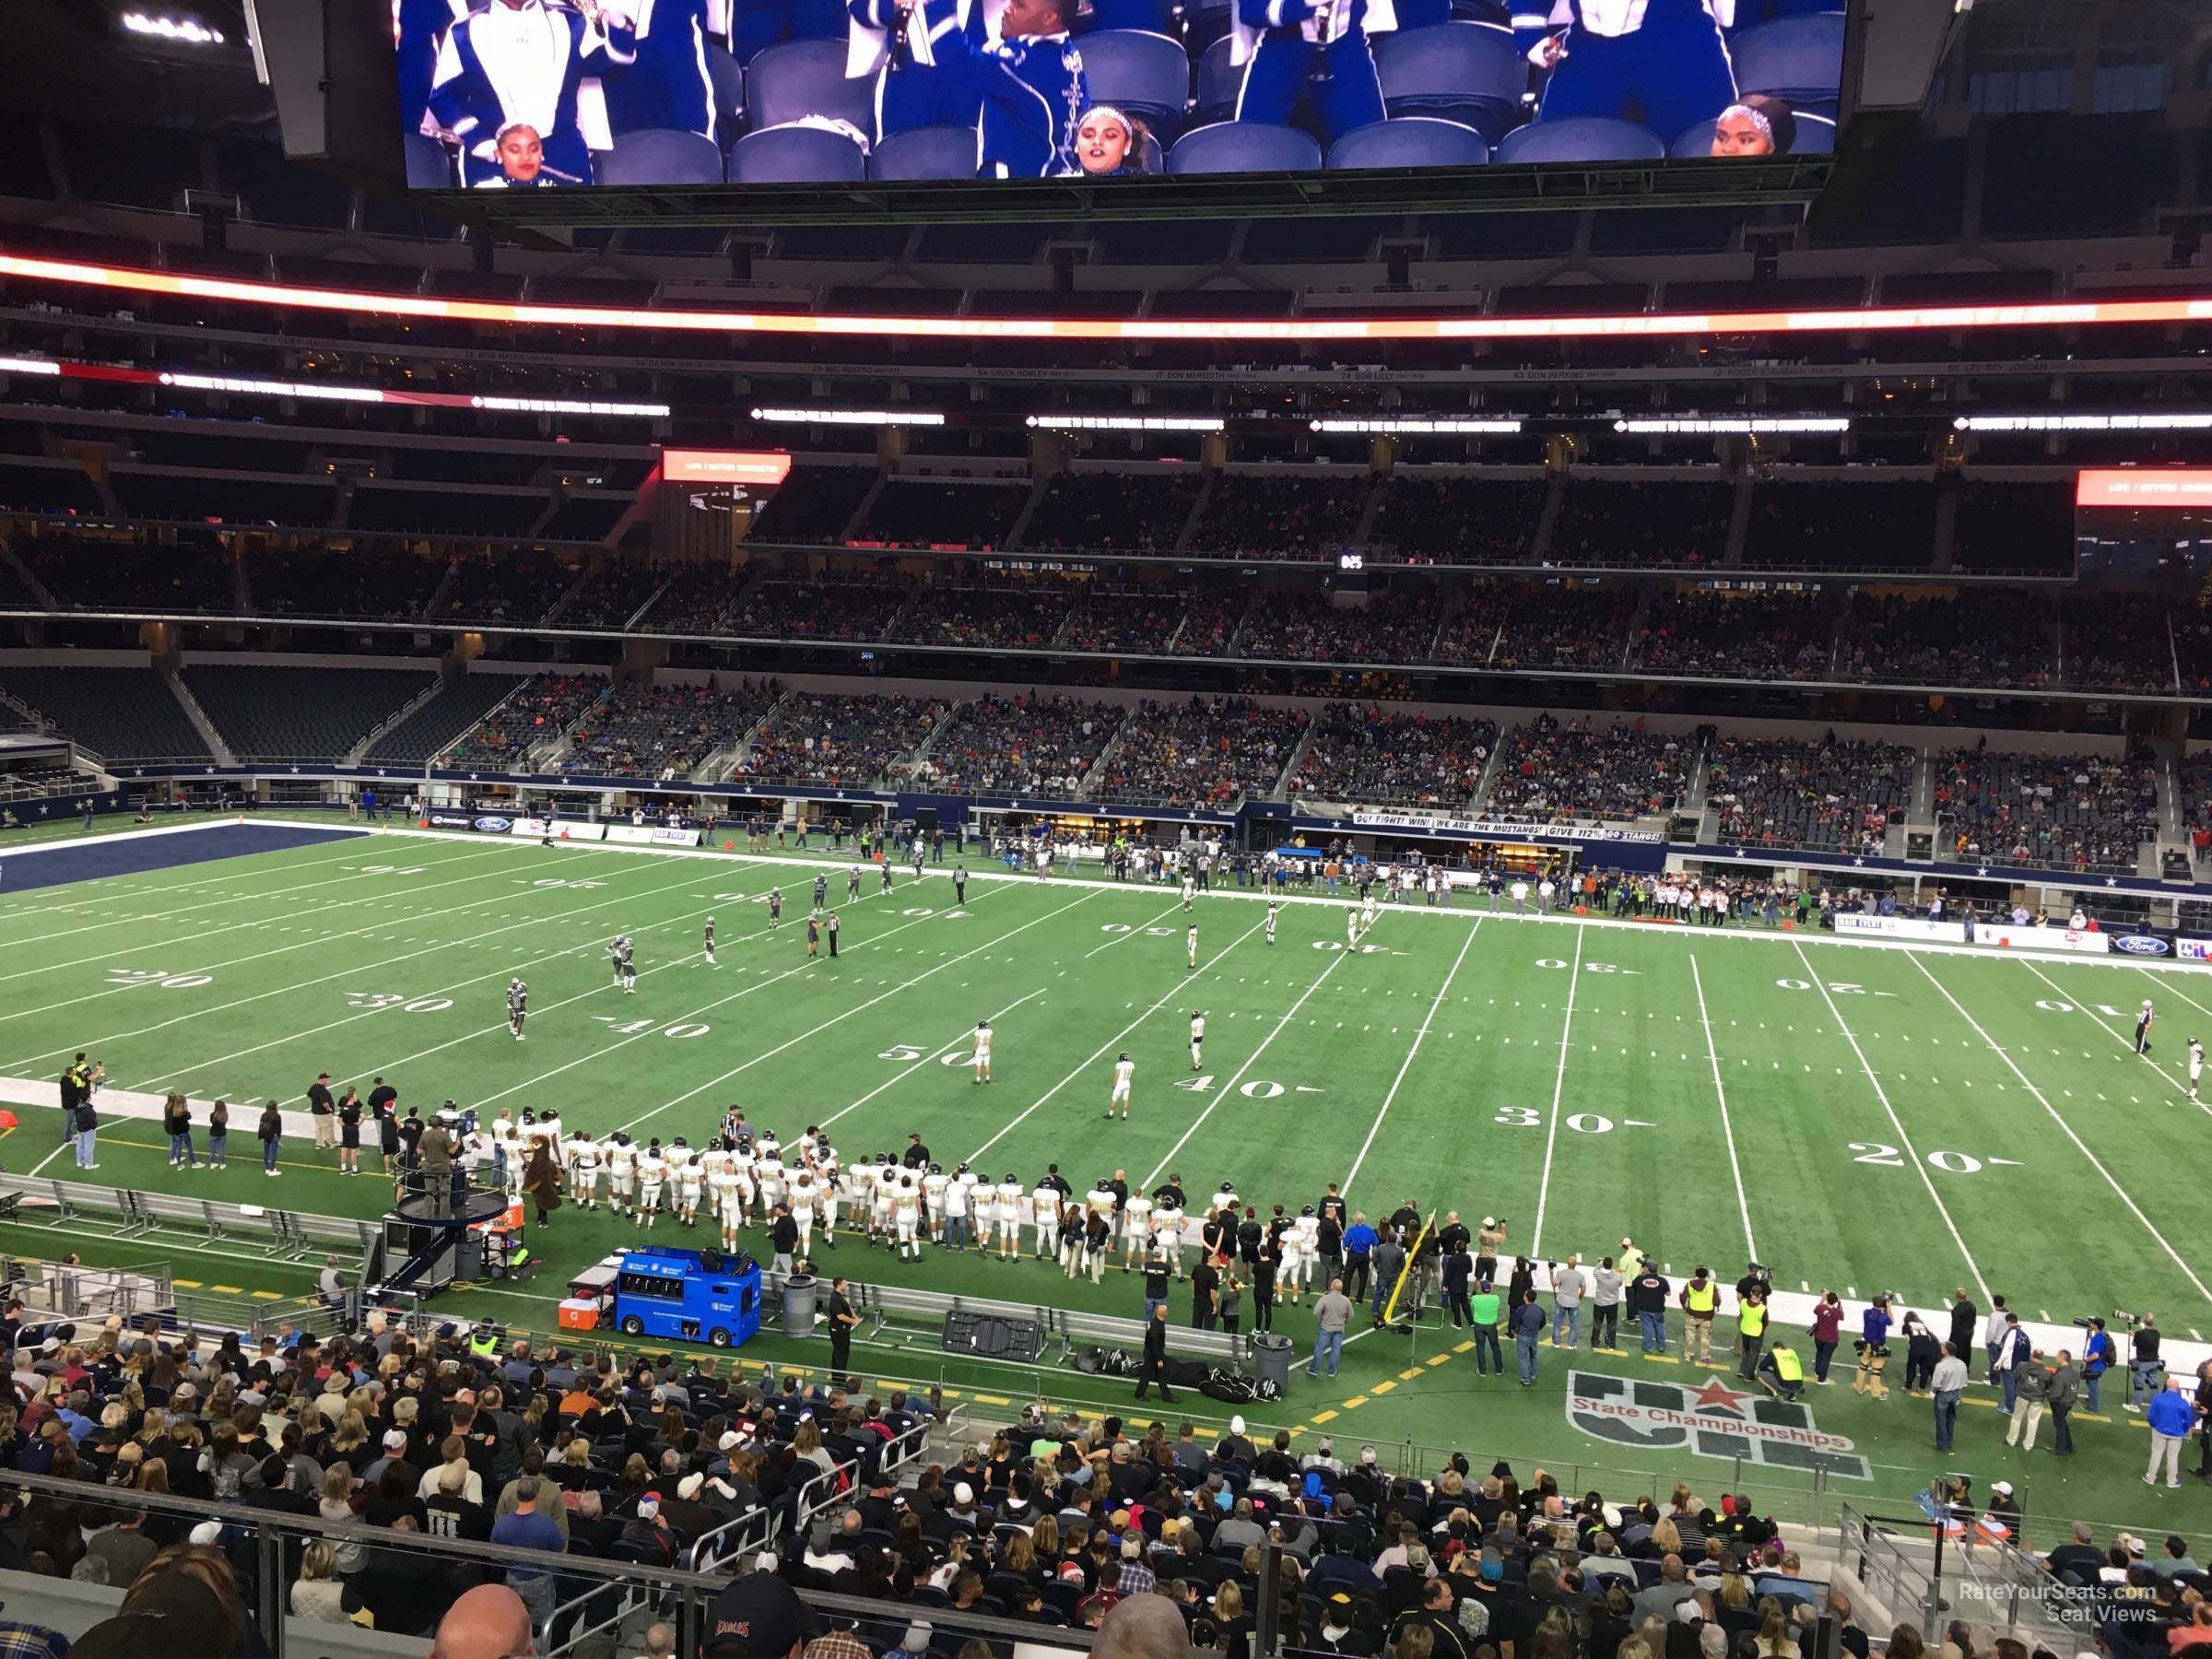 section c233, row 4 seat view  for football - at&t stadium (cowboys stadium)